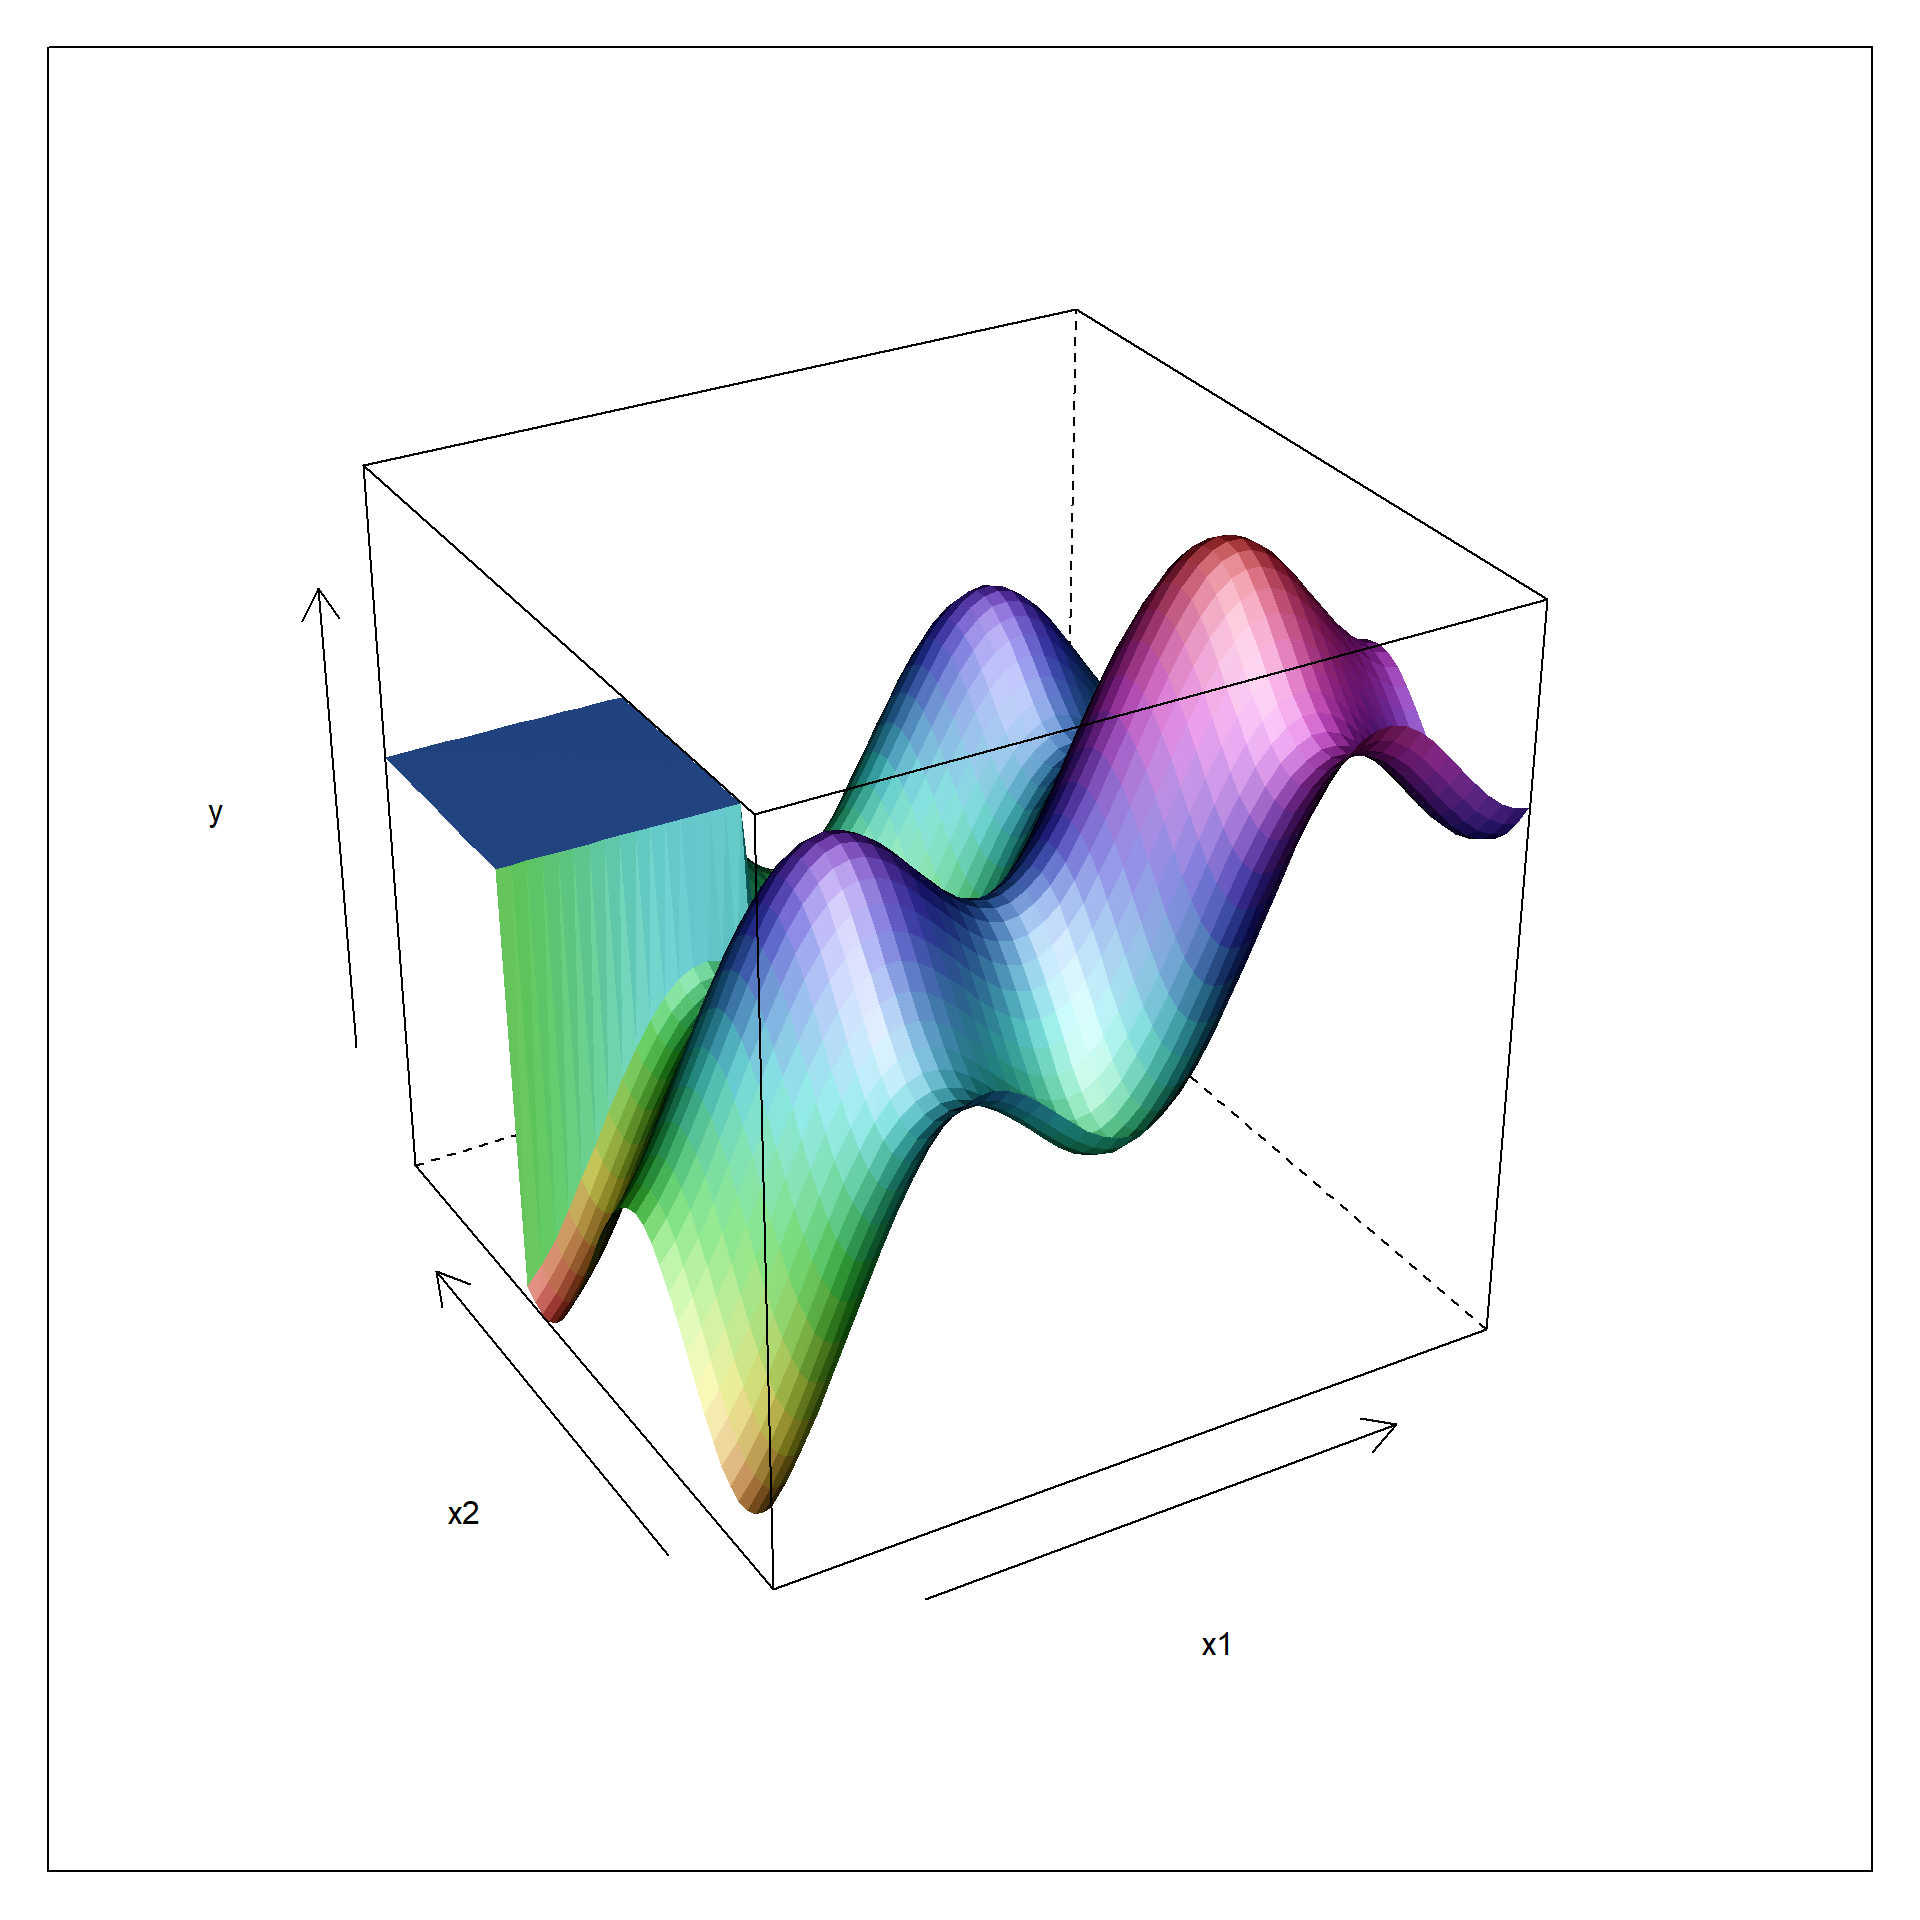 Non-linear function with smooth and non-smooth domains in two dimensions